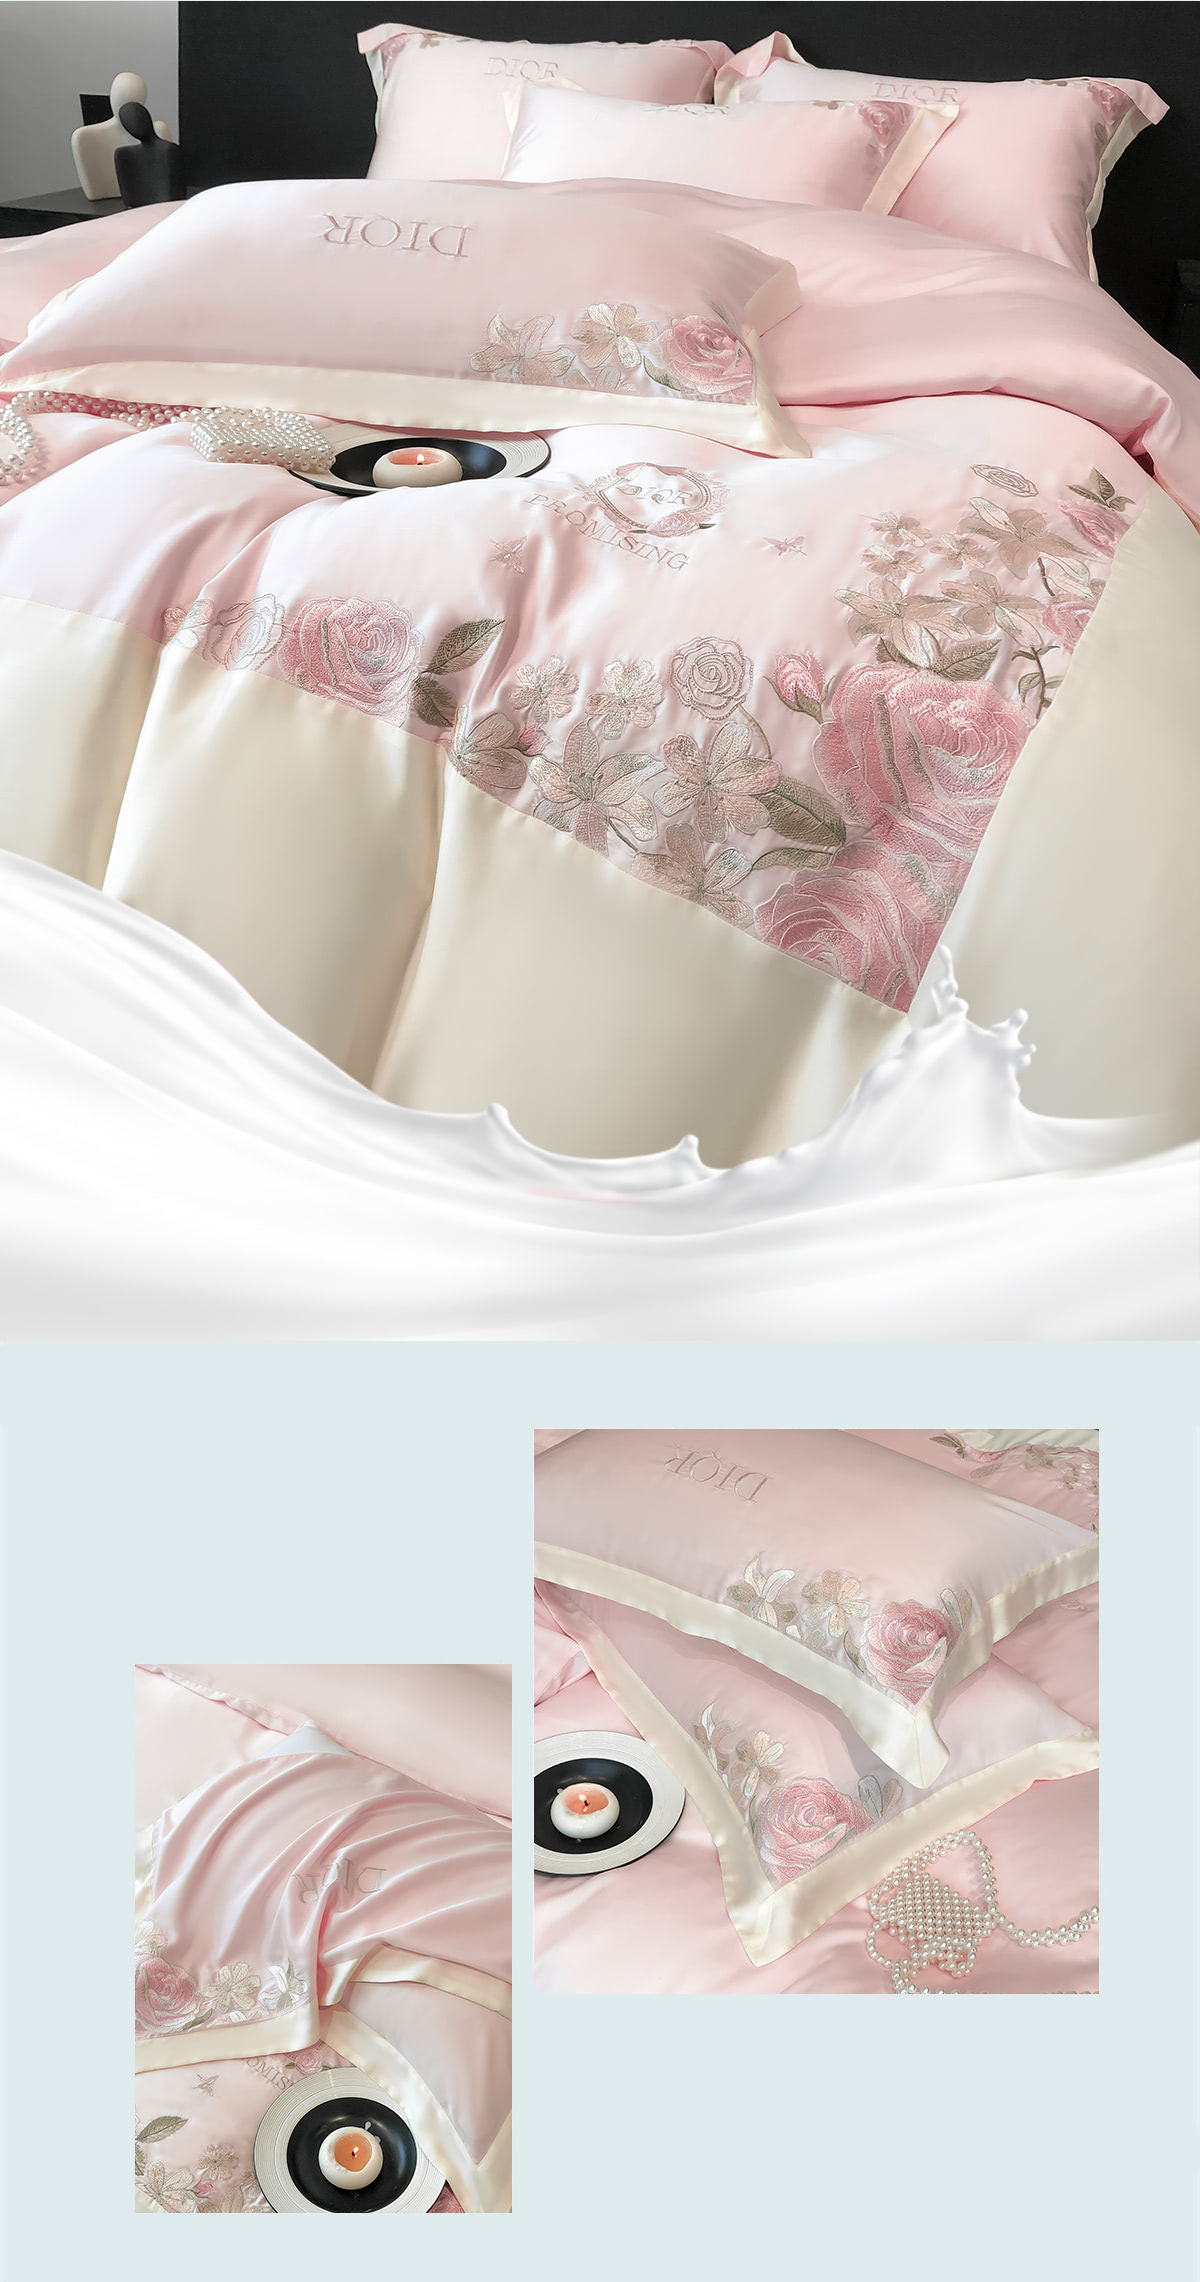 Aesthetic-Embroidery-Home-Textiles-Duvet-Cover-Bedding-Set23